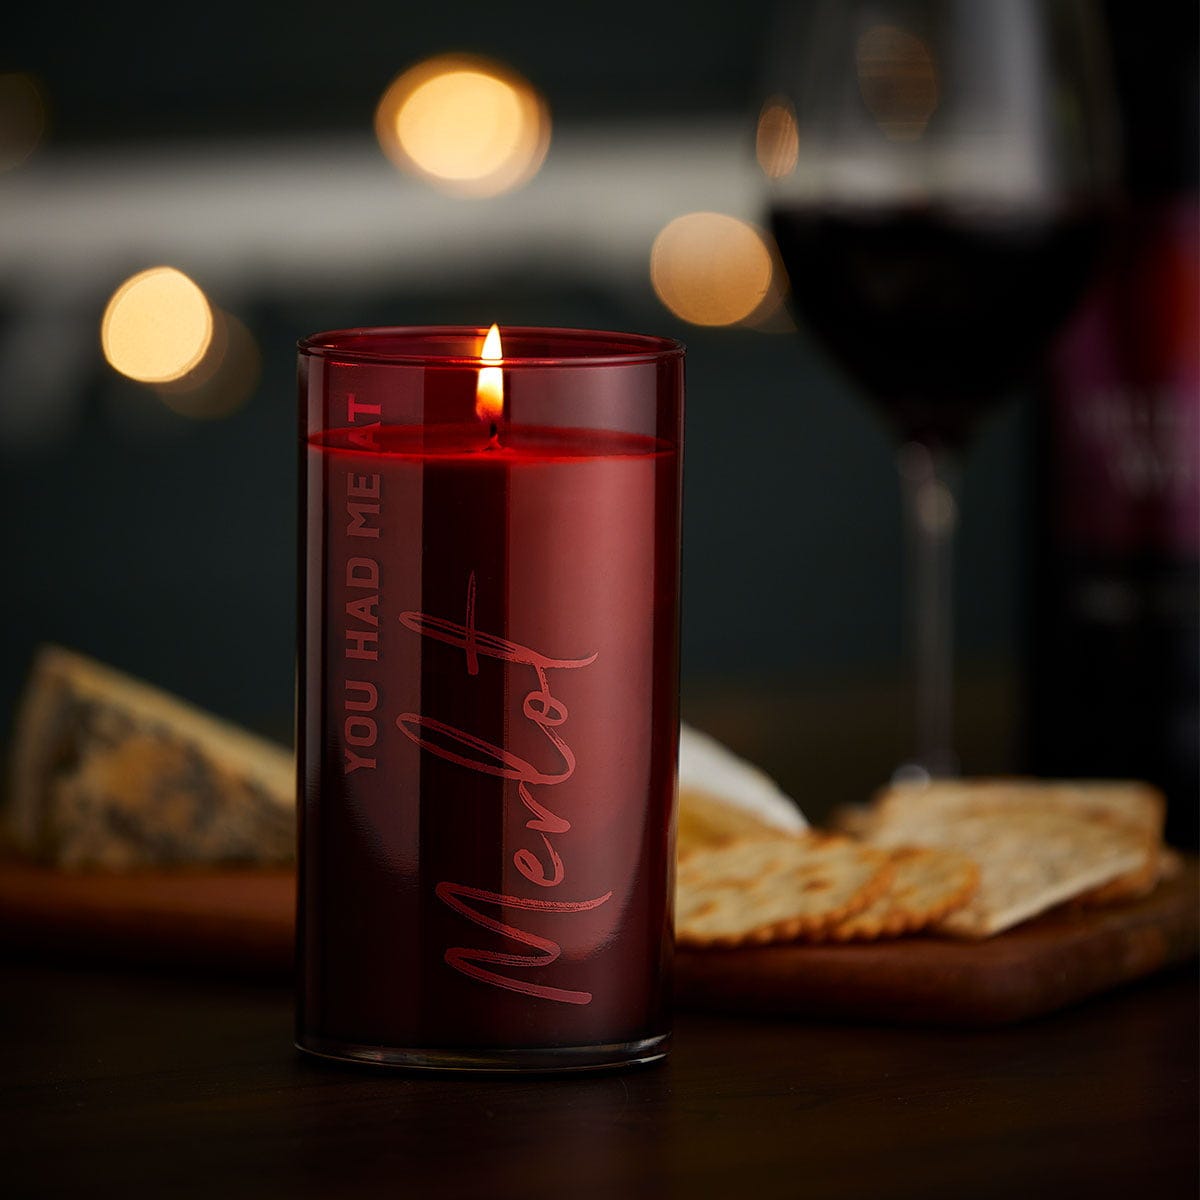 You Had Me at Merlot - Raspberry, Cherry and White Oak Scented Jar Candle